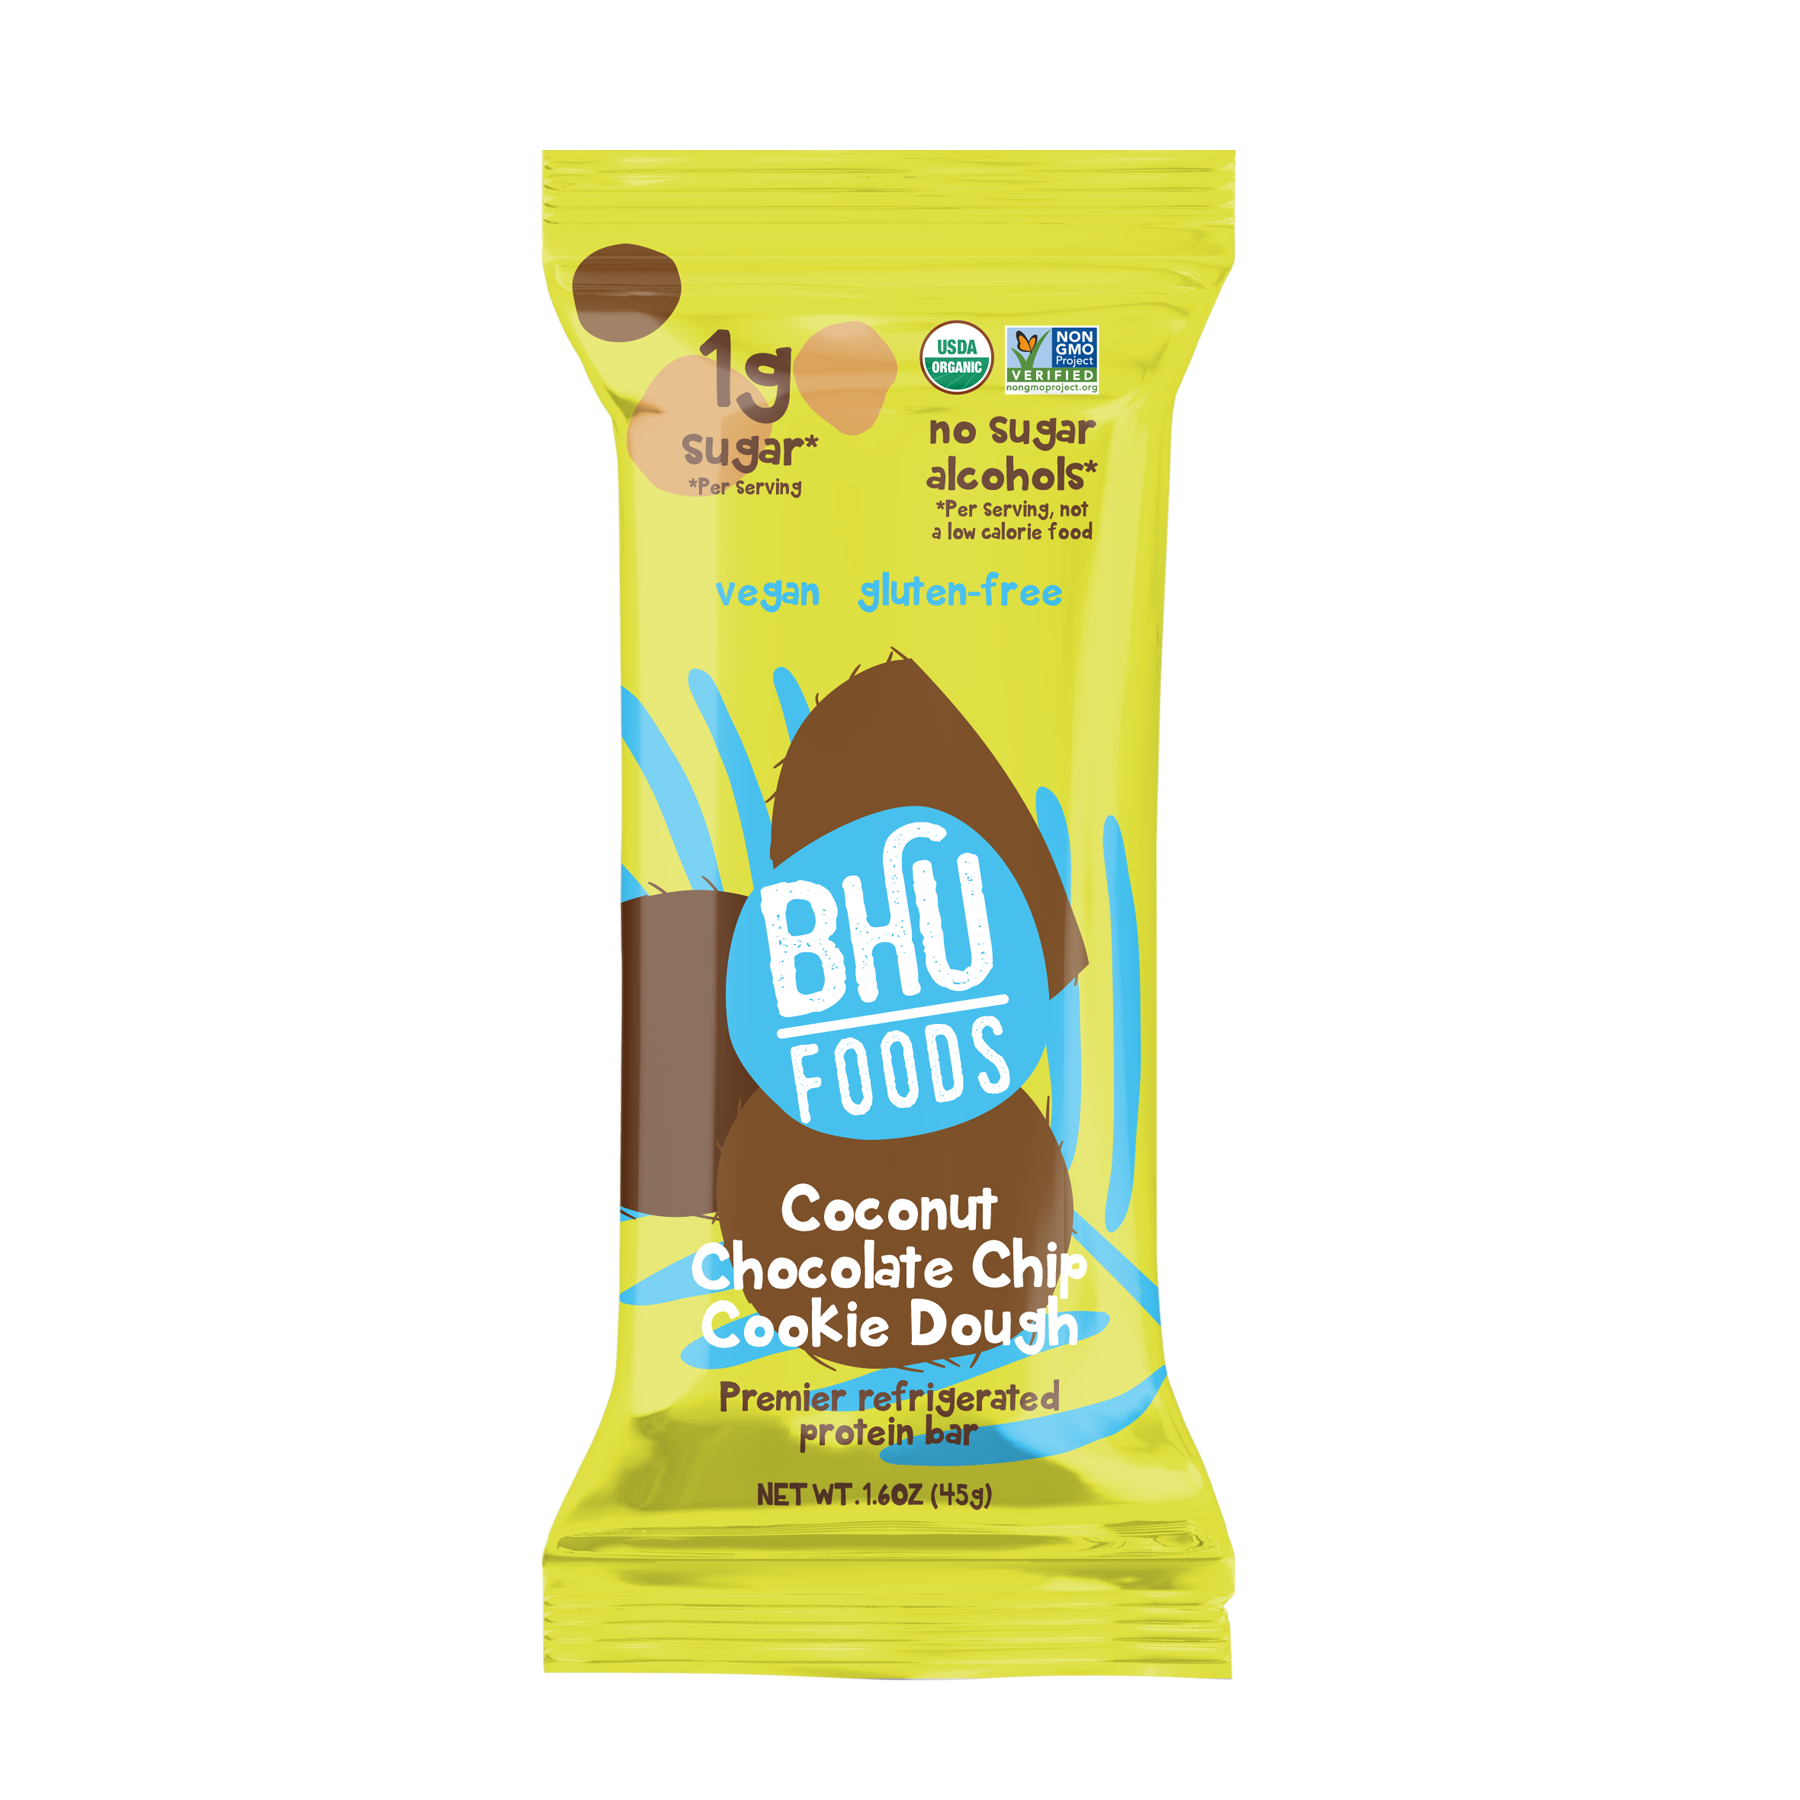 BHU Foods Premier Refrigerated Protein Bar - Chocolate Coconut Cookie Dough 12 innerpacks per case 12.8 oz